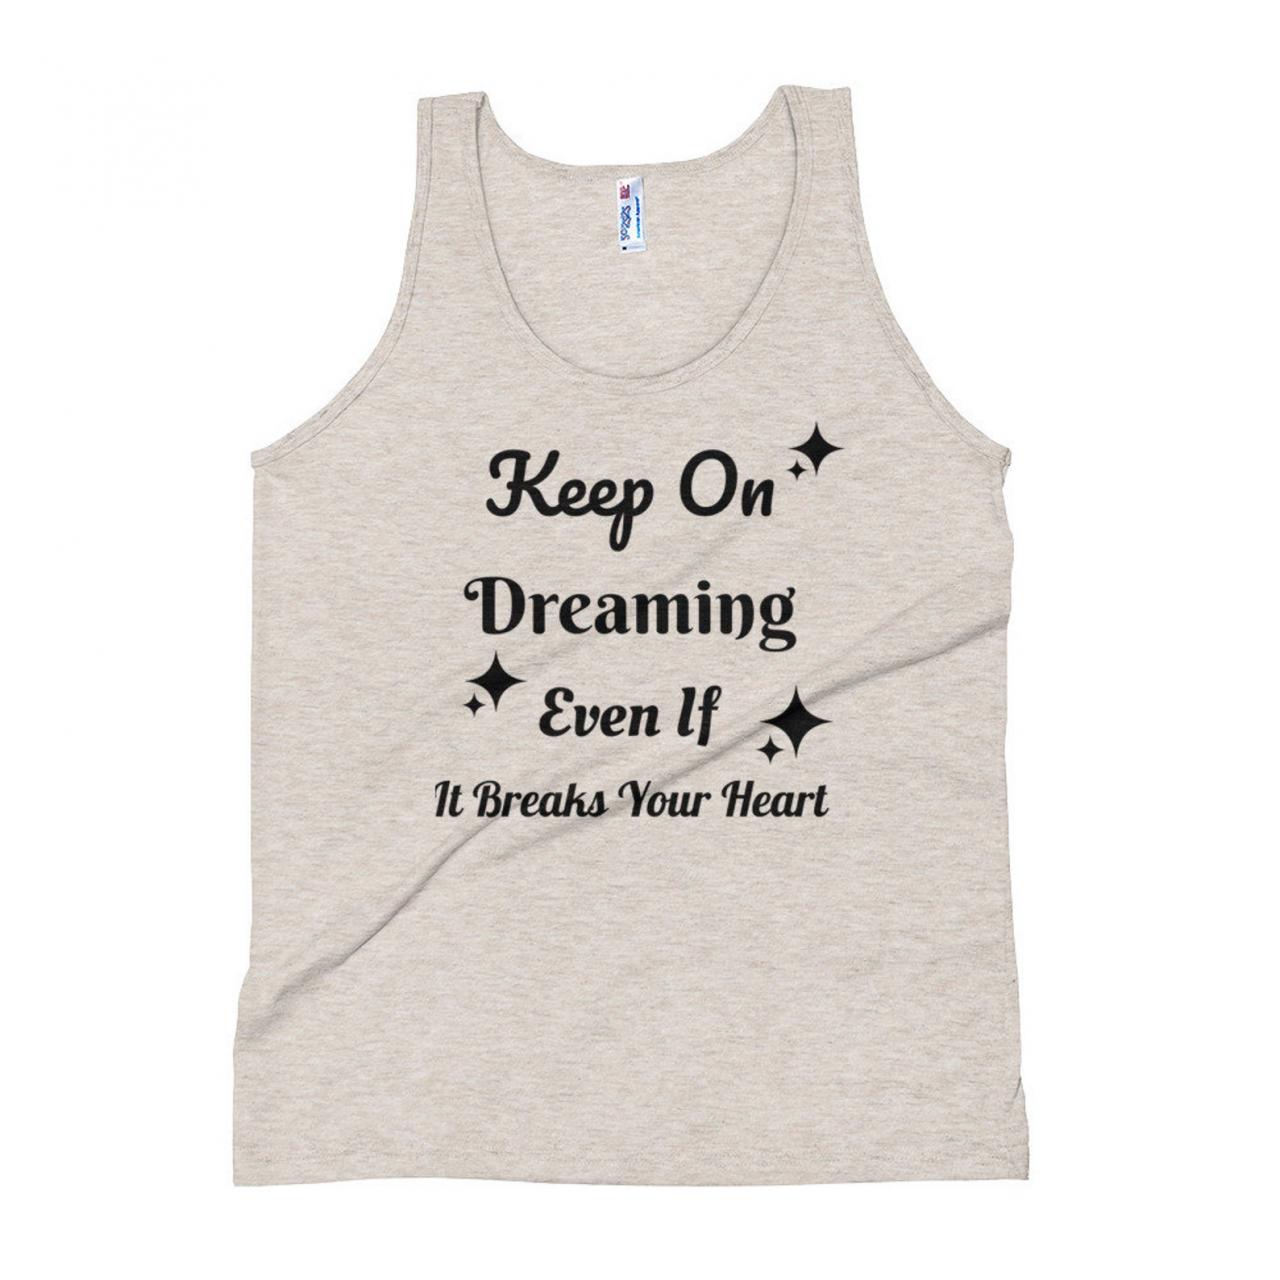 Keep On Dreaming Even If It Breaks Your Heart, Inspirational Tank, Country Tank Top, Gift For Women, Concert Tank, Farm Girl Tank Top, Farm